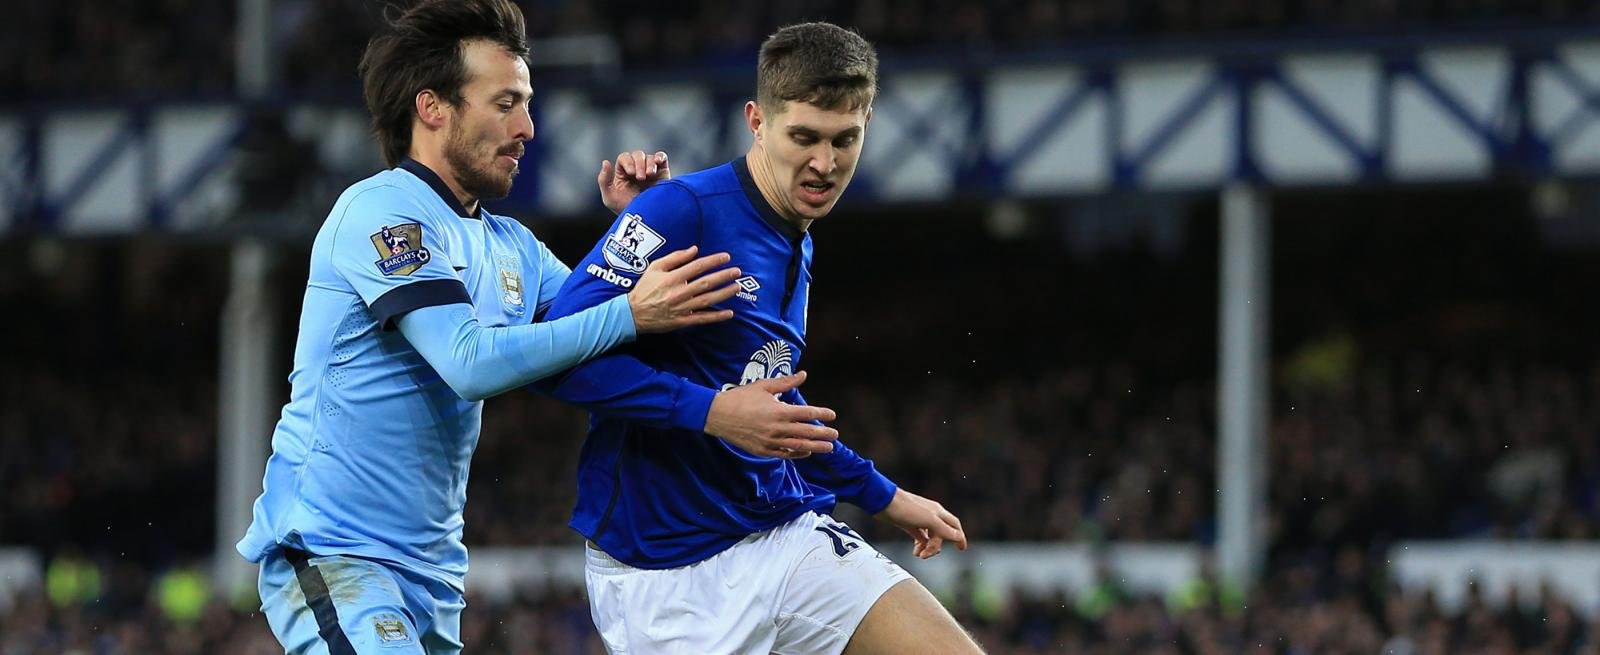 Everton must spend to keep players like Stones